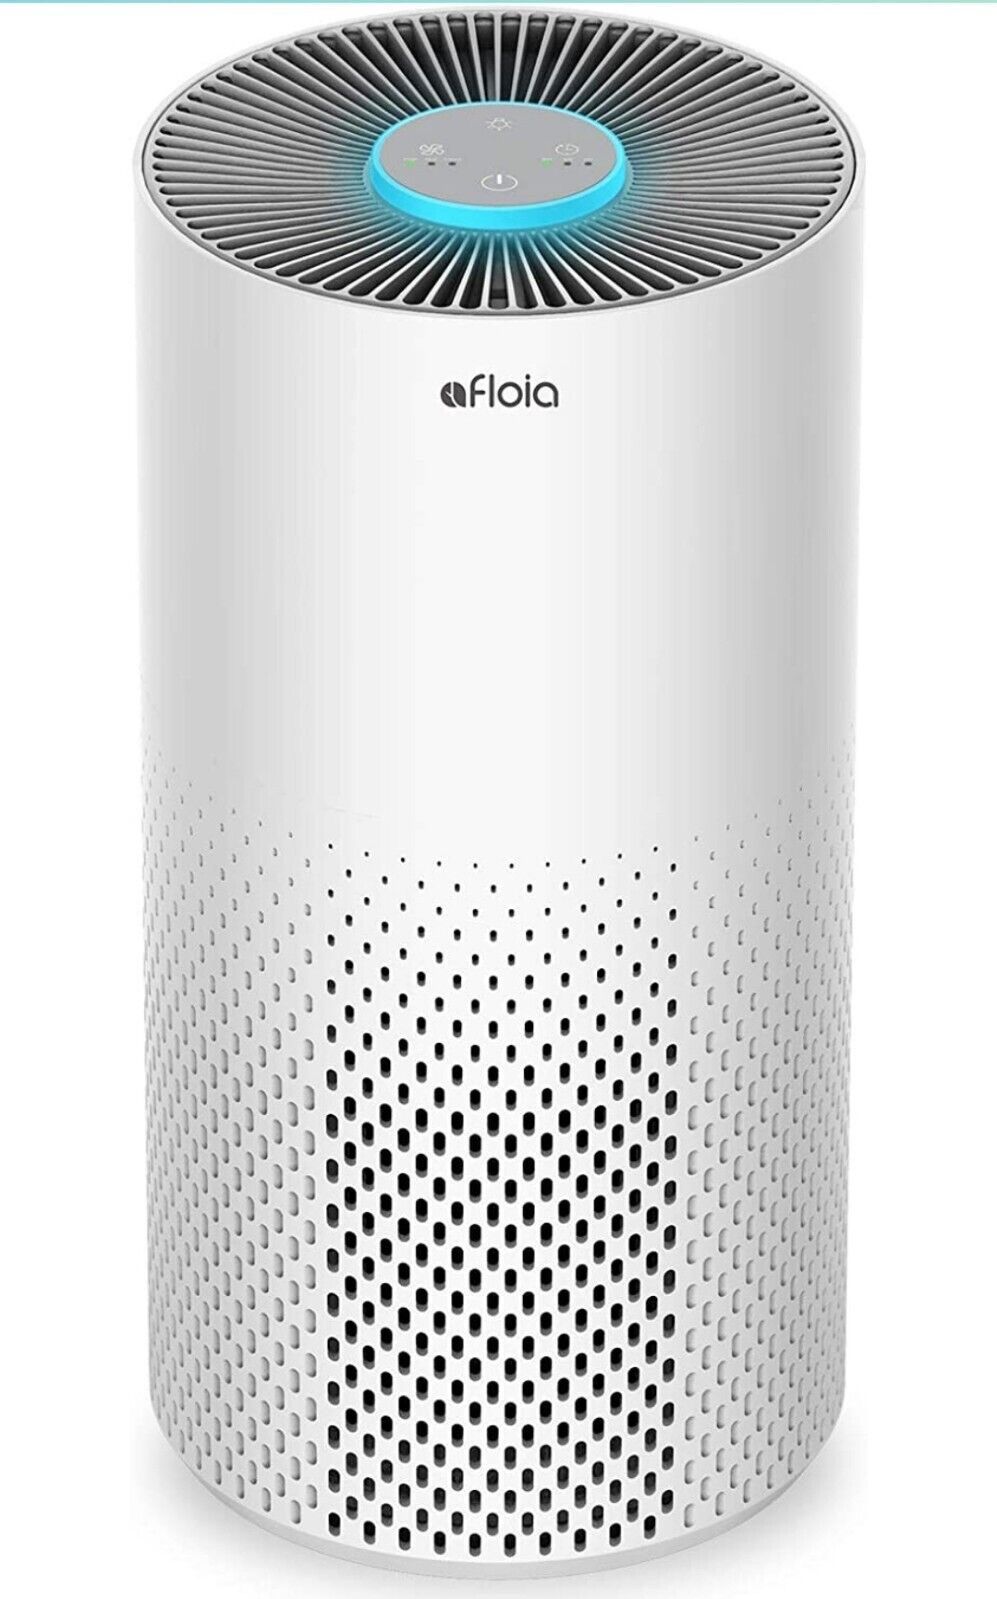 Afloia Air Purifiers for Home Large Room Up to 1076 Ft², H13 True HEPA Air Purifiers for Bedroom 22 dB, Air Purifiers for Pets Dust Dander Mold Pollen